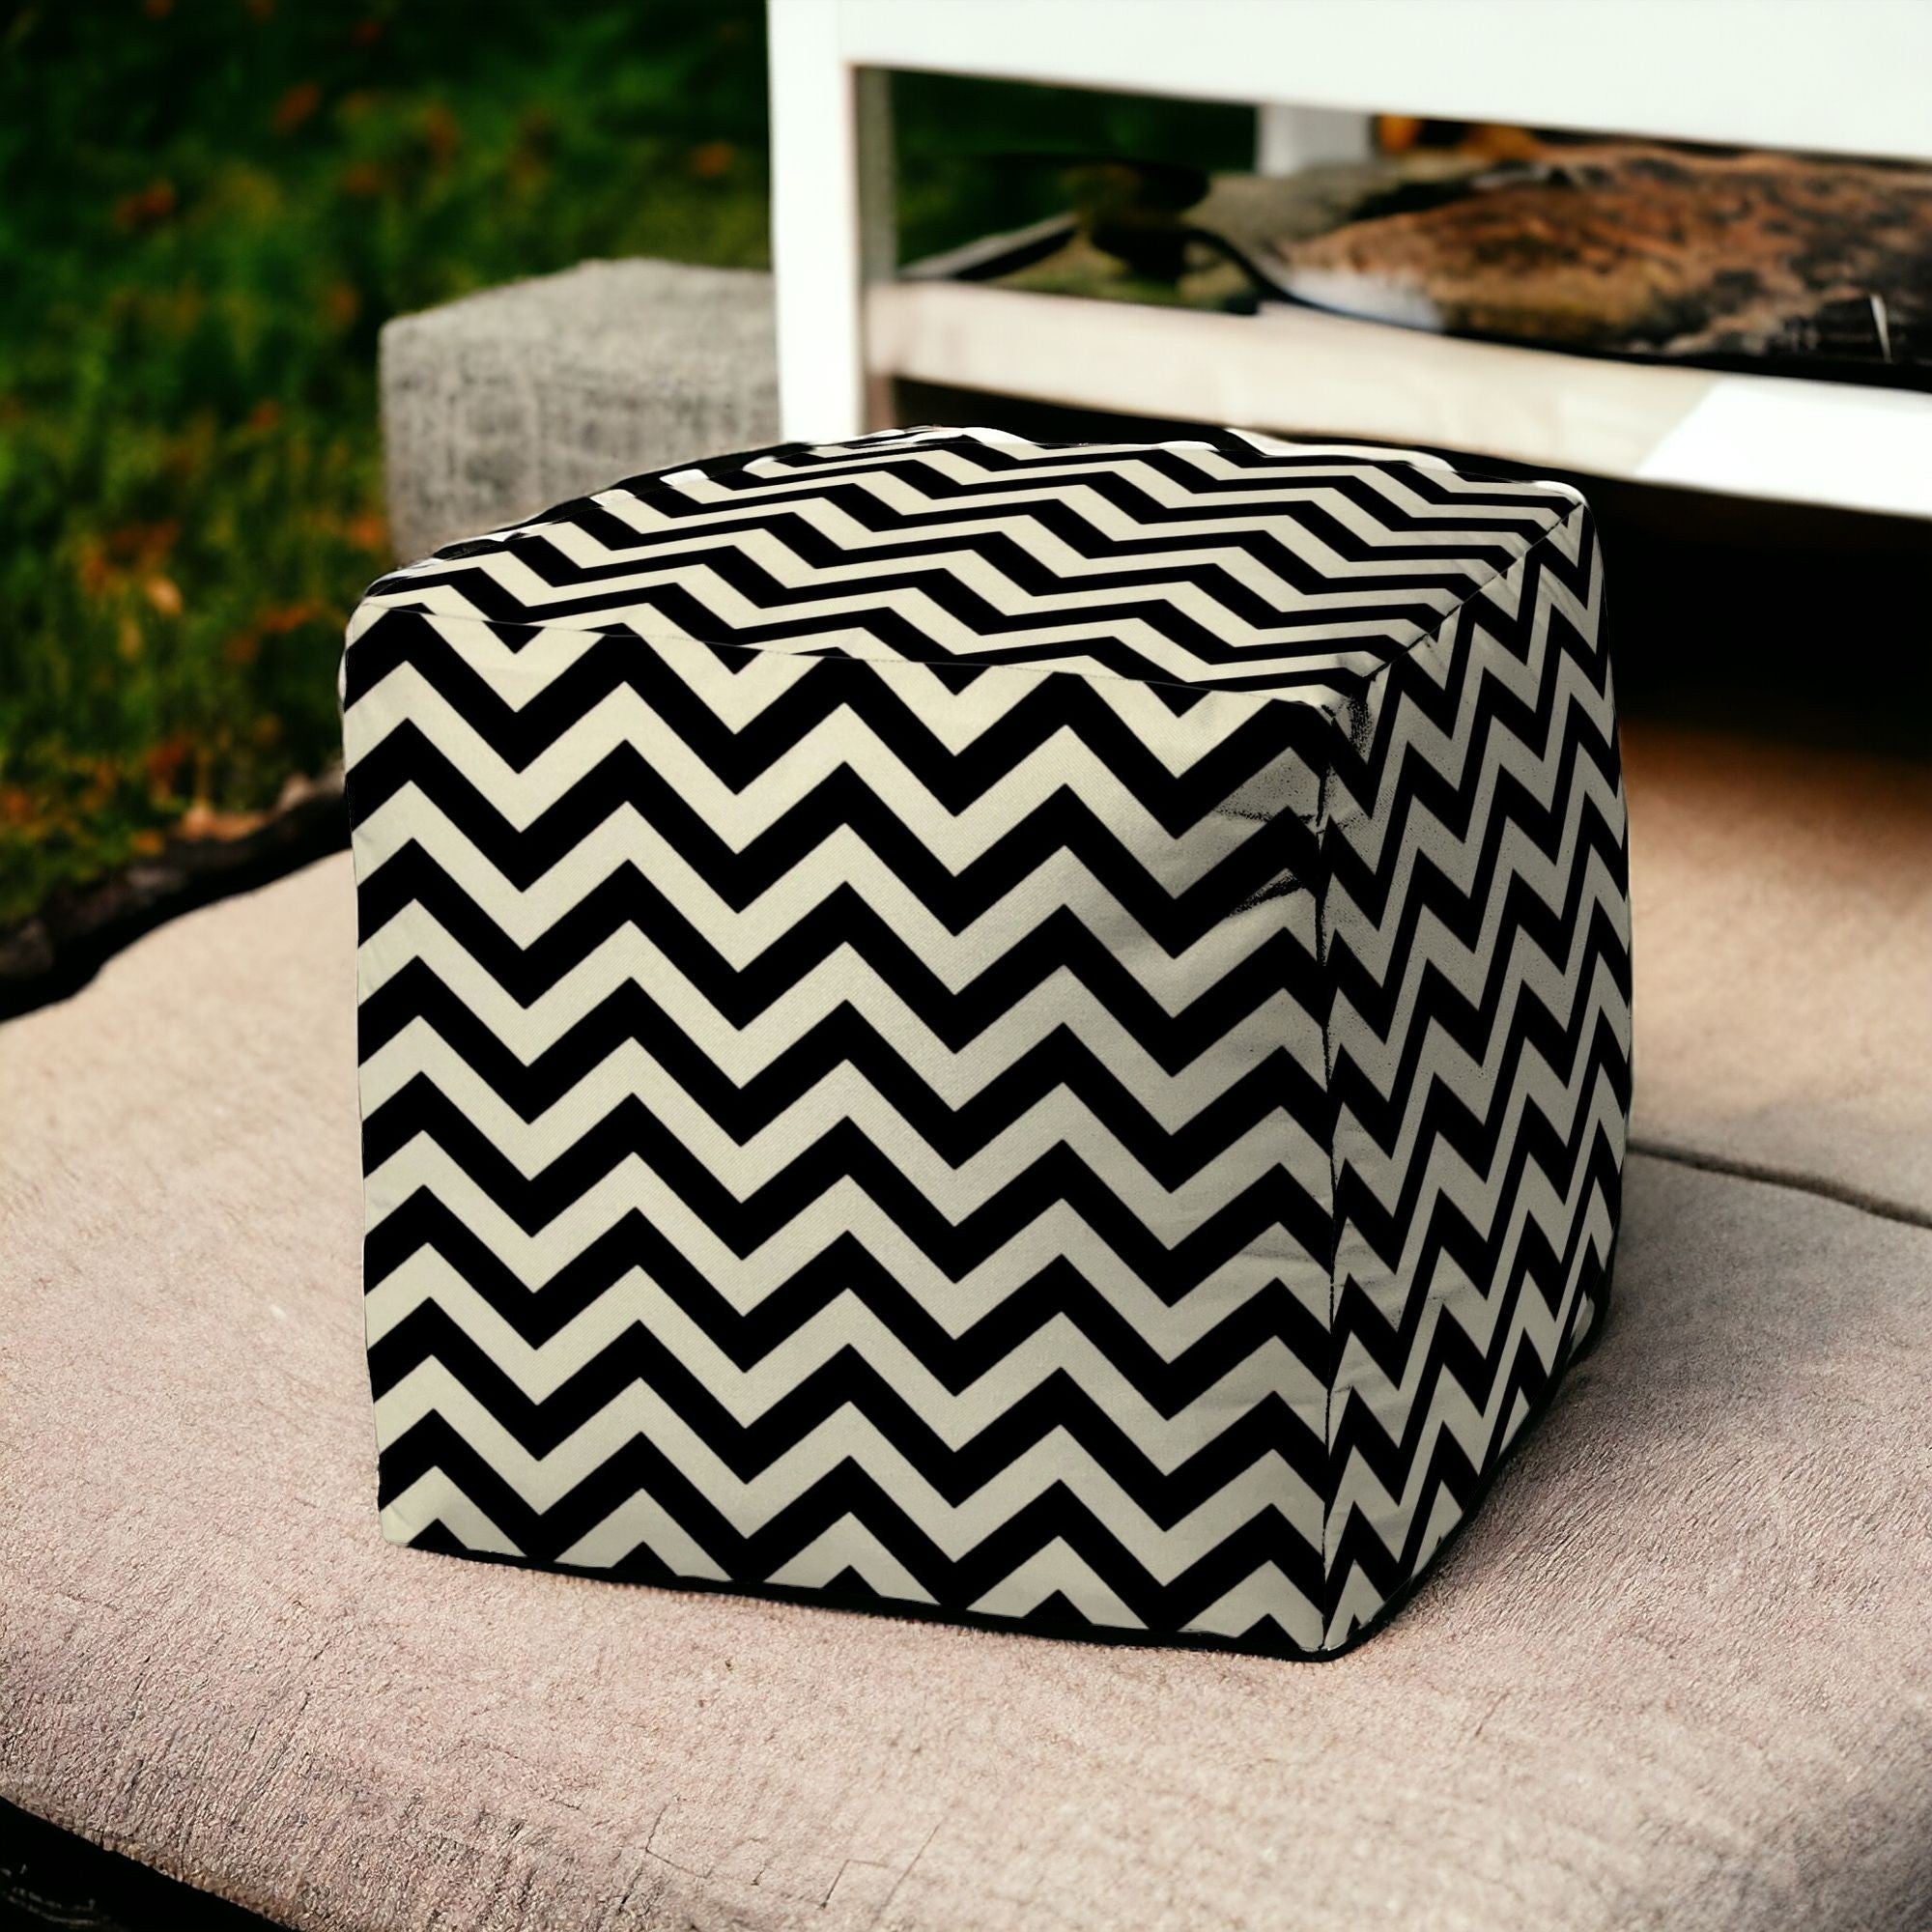 17" Black And White Cube Chevron Indoor Outdoor Pouf Cover